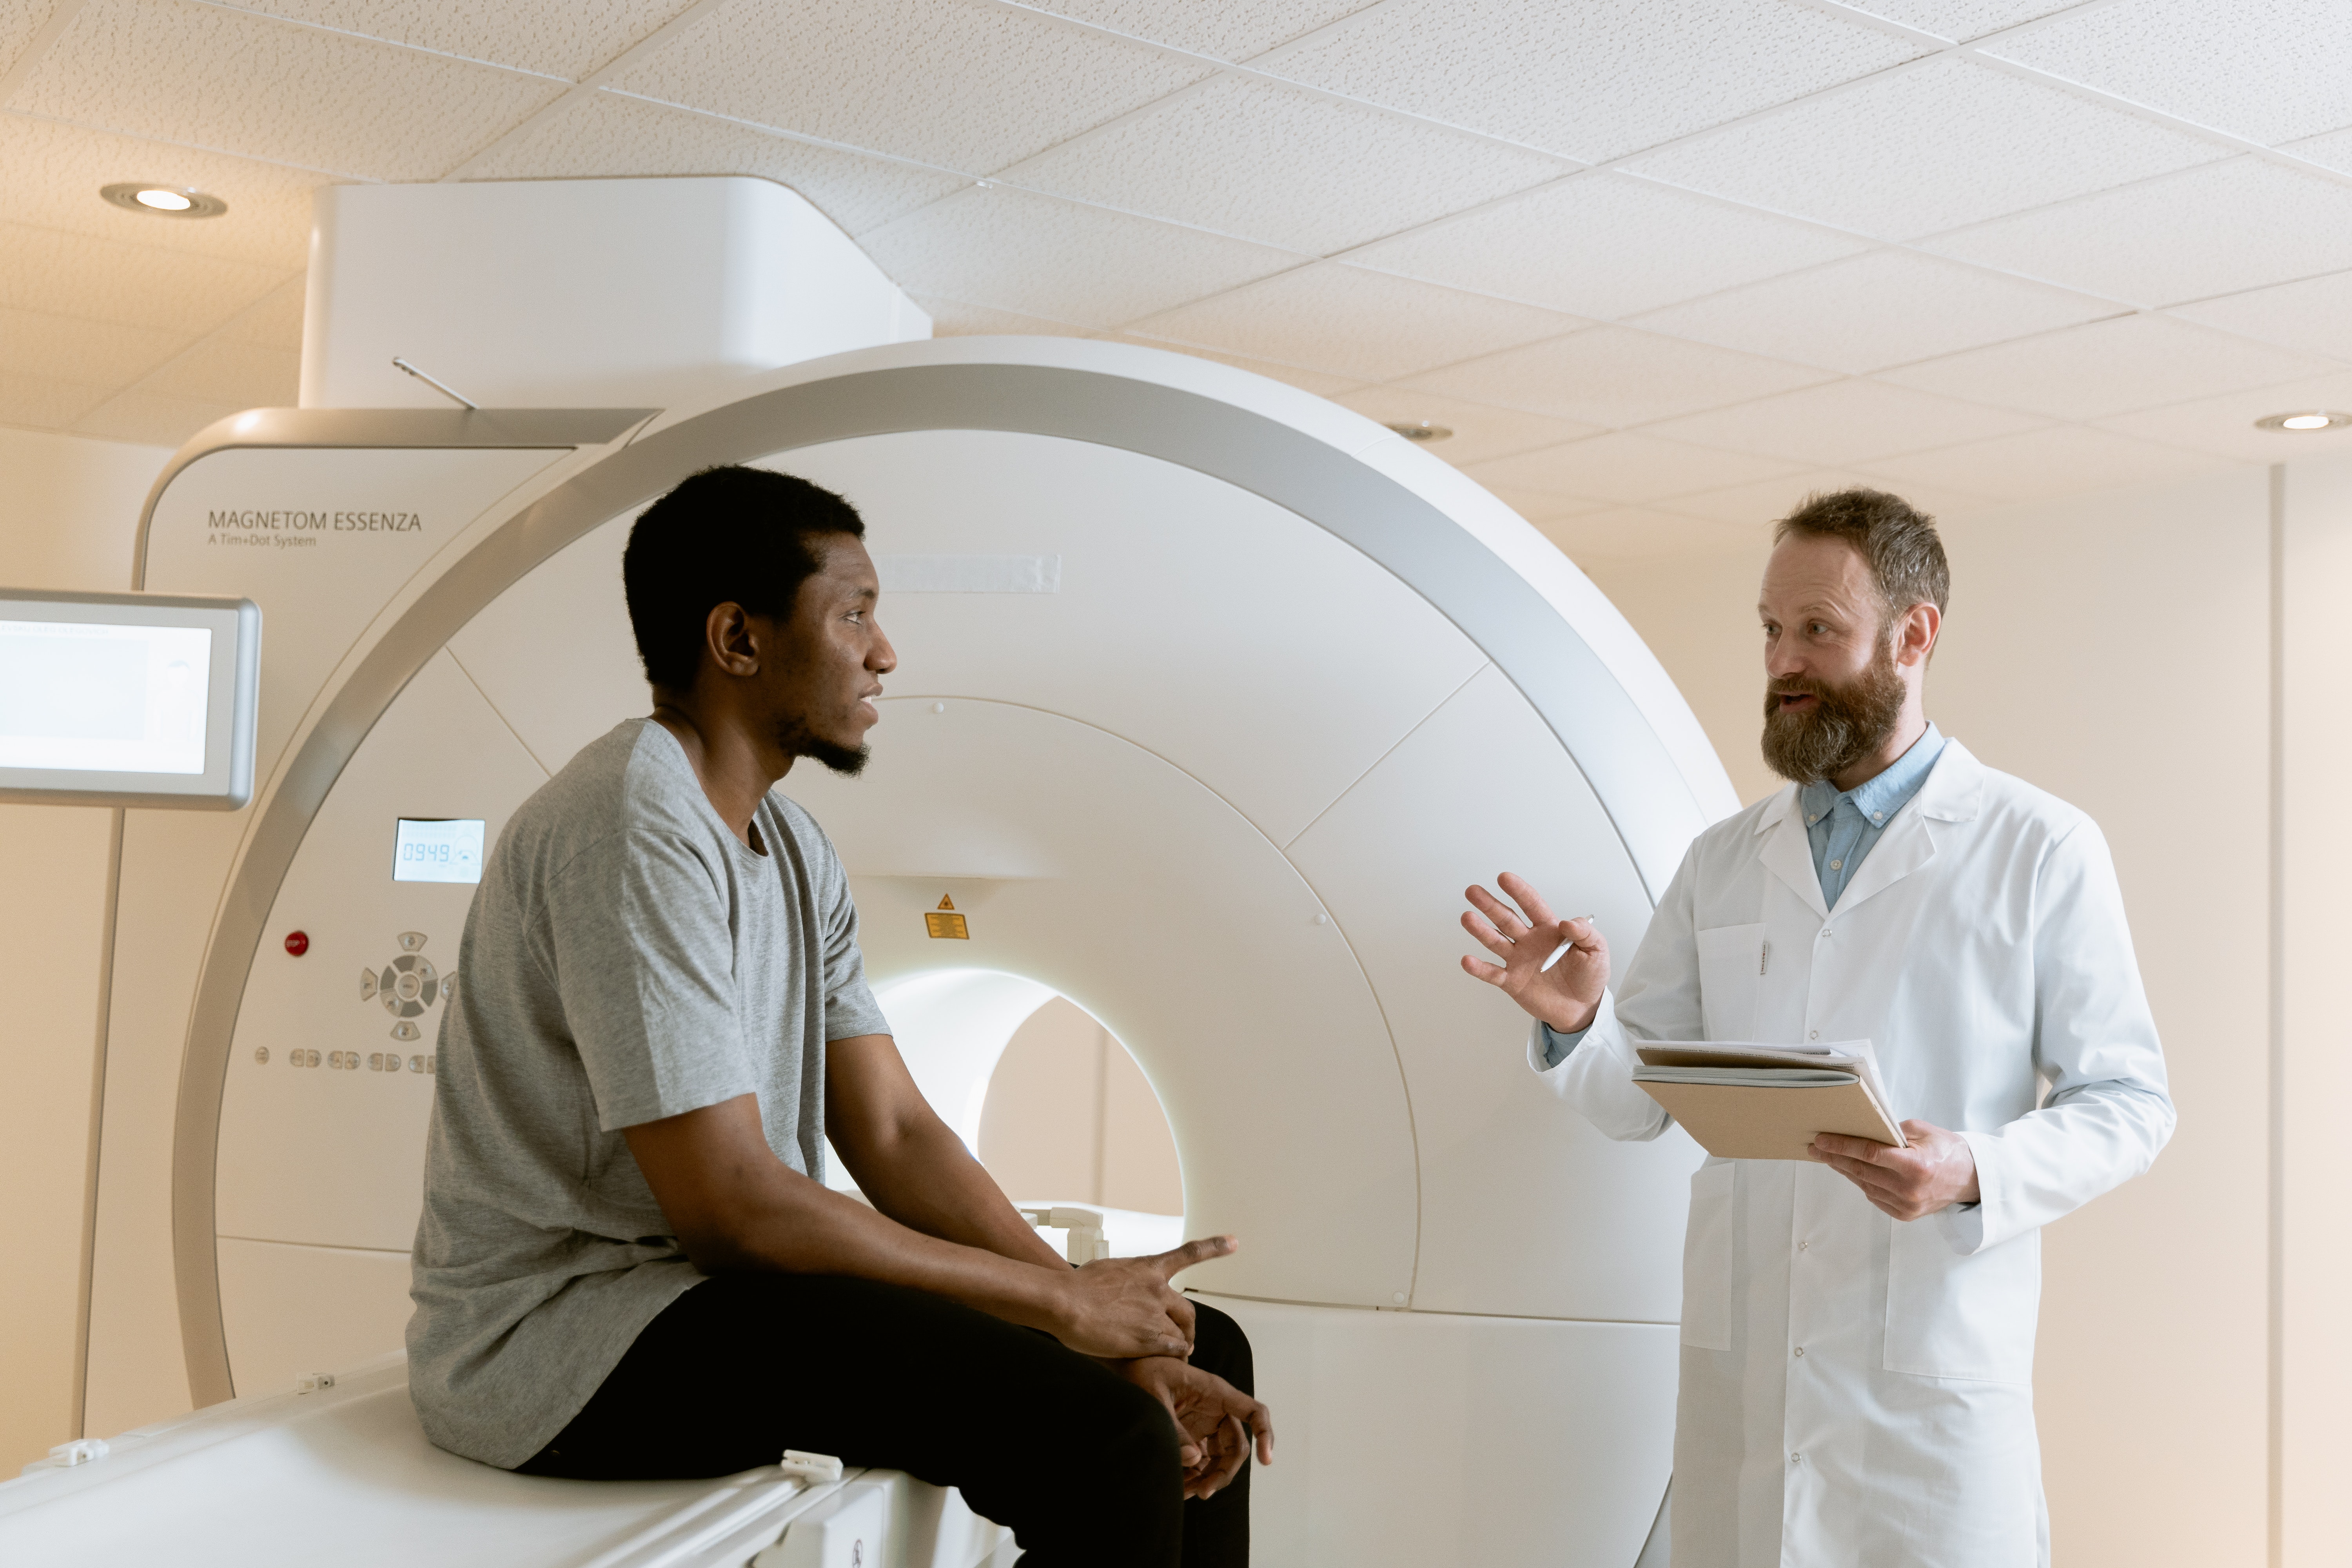 A man sitting on the bed of an MRI scanner is talking to another man in a medical blouse